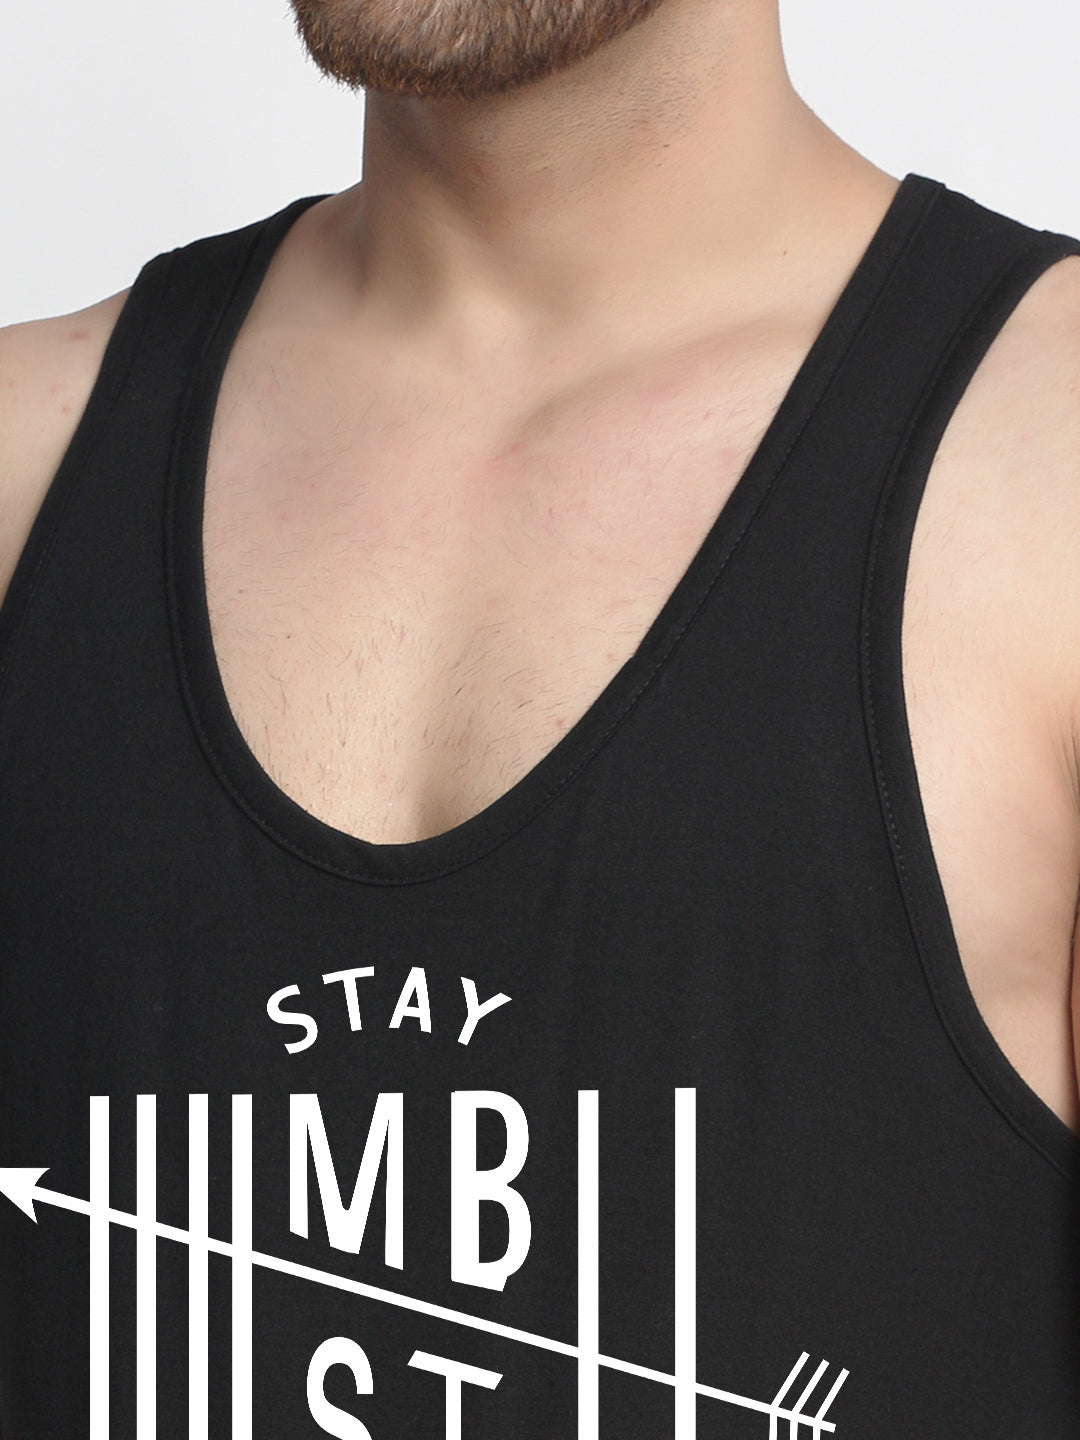 Stay Humble Hard Printed Innerwear Gym Vest - Friskers